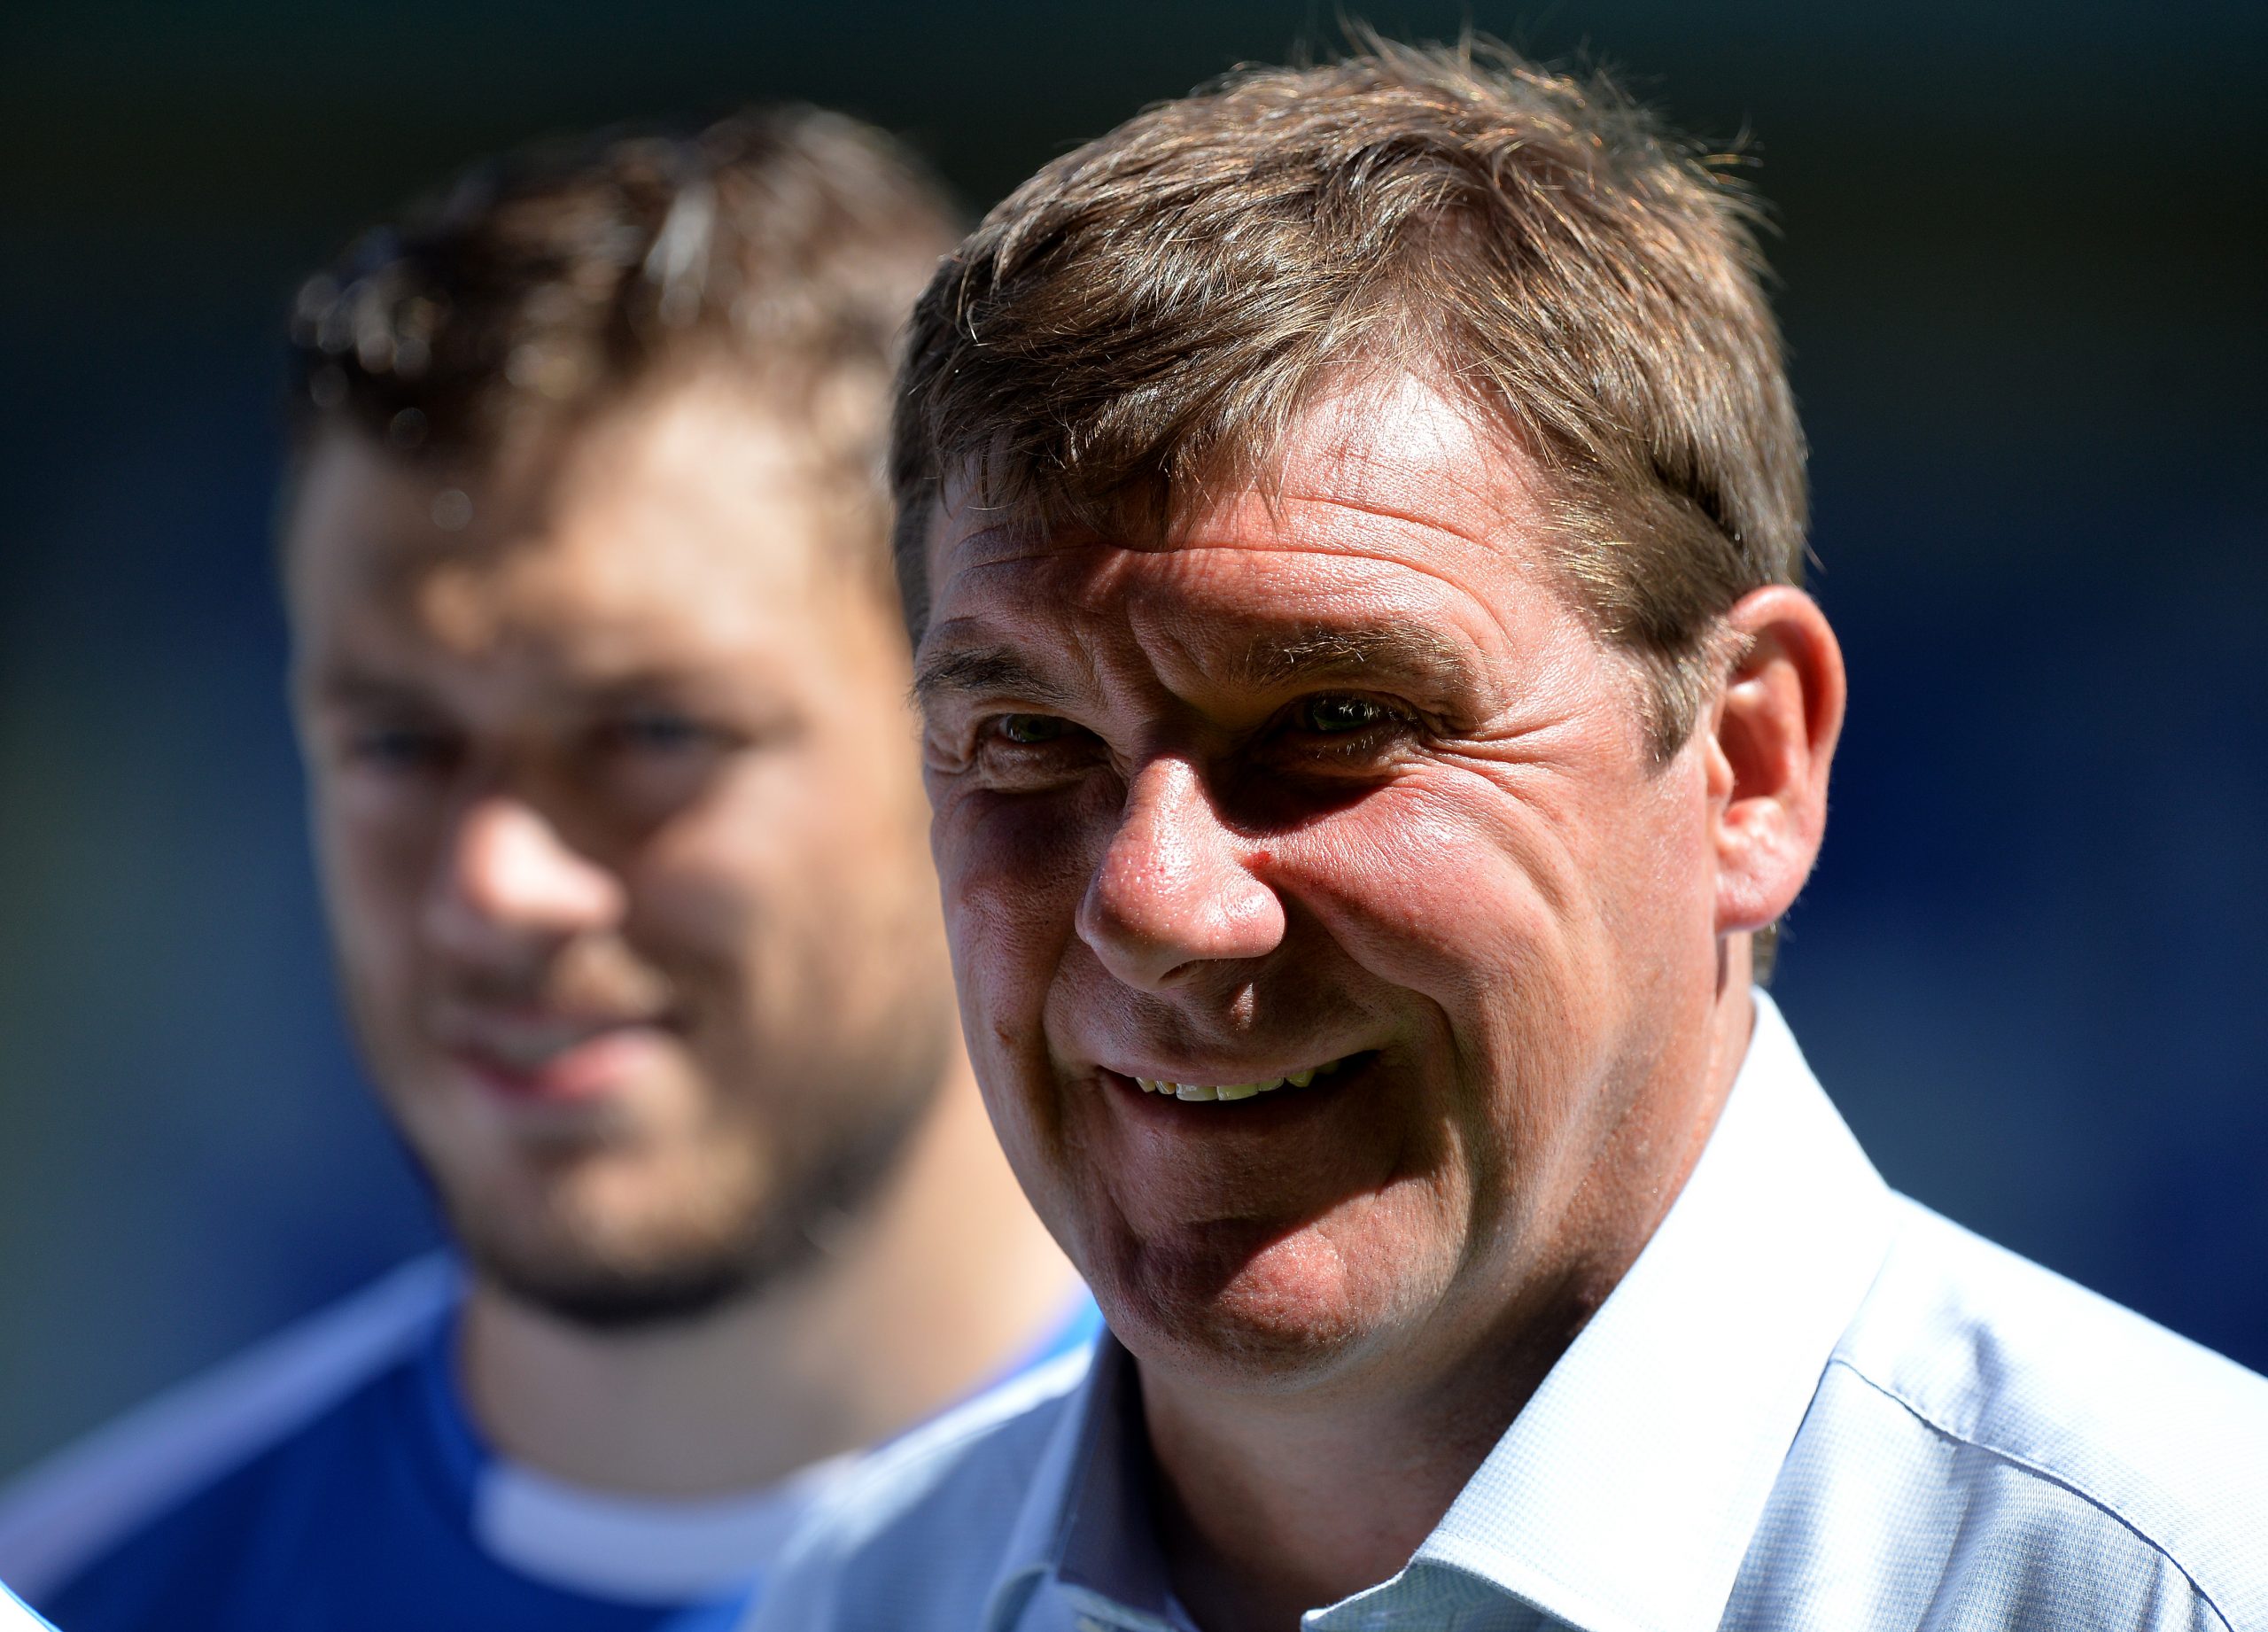 PERTH, SCOTLAND - JULY 08: St Johnstone manager Tommy Wright looks on during the Pre-Season Friendly between St Johnstone and Aberdeen at McDiarmid Park on July 8, 2018 in Perth, Scotland.